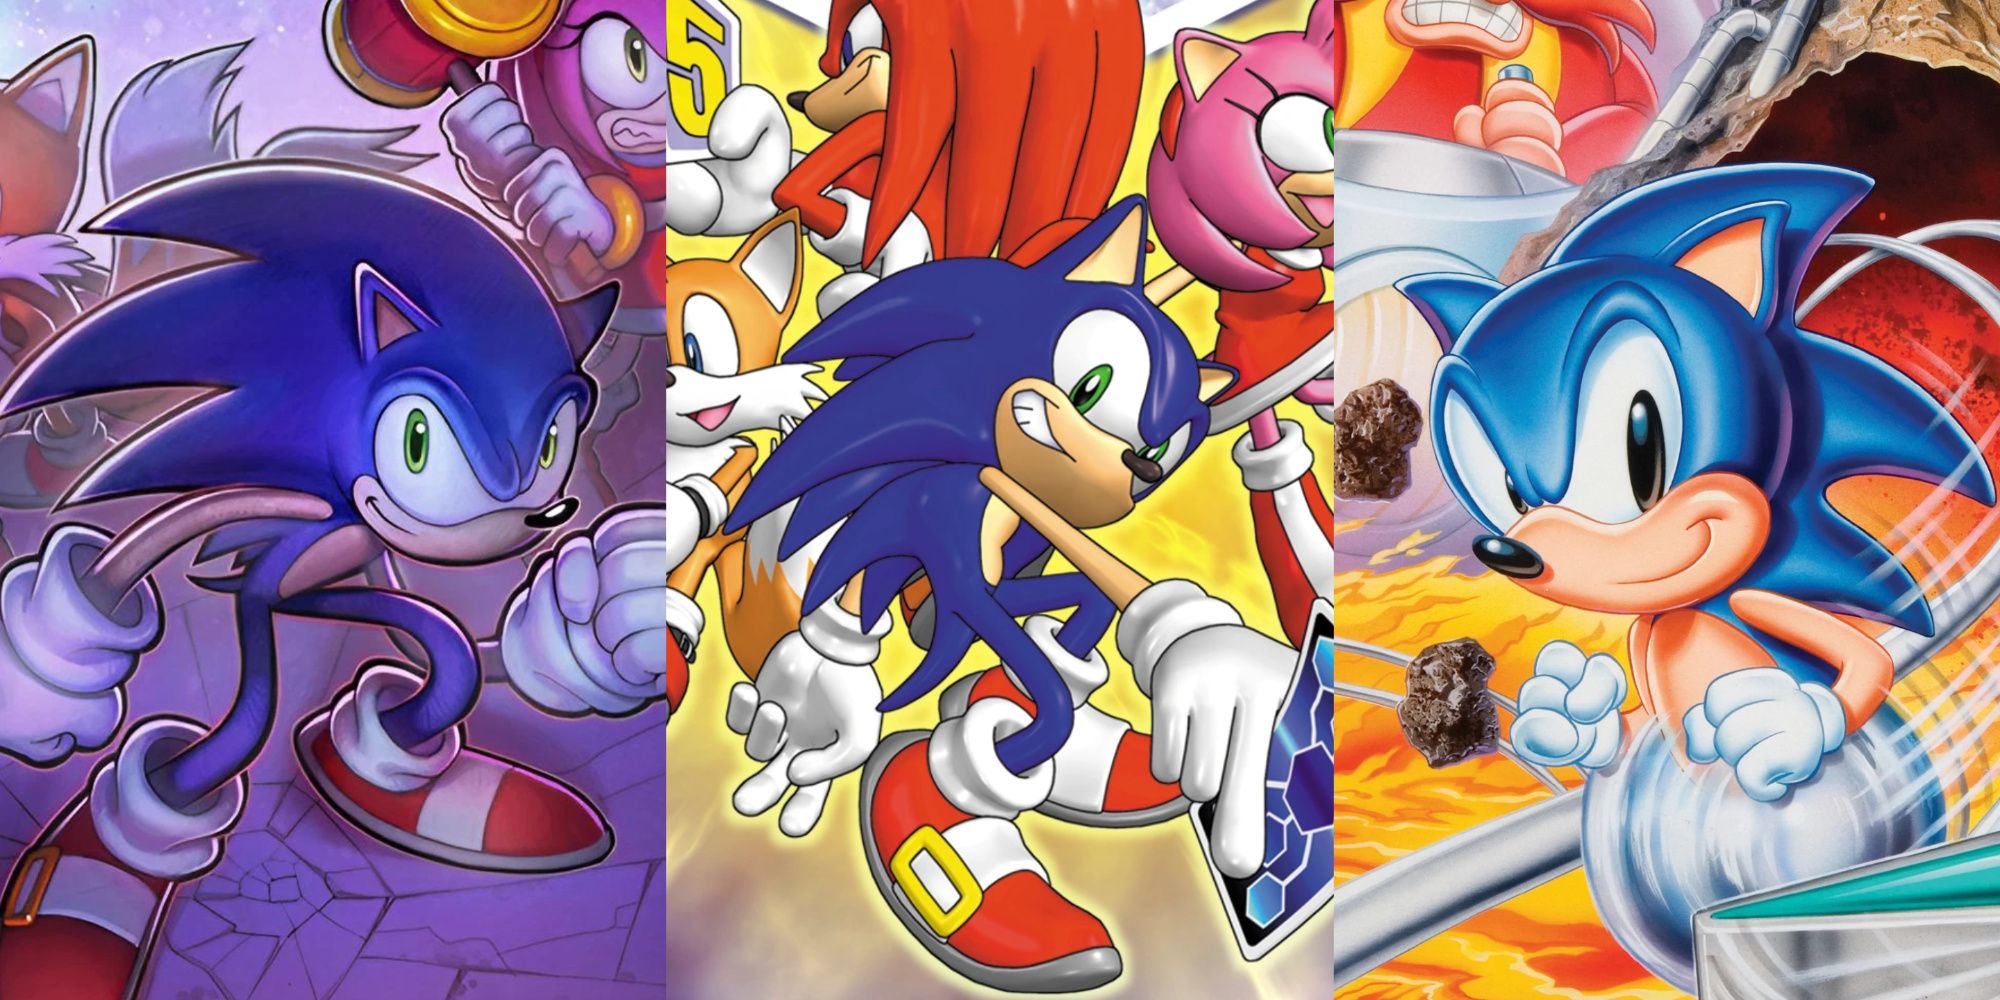 A split image with boxart from Sonic Chronicles, Sonic Shuffle, and Sonic Spinball